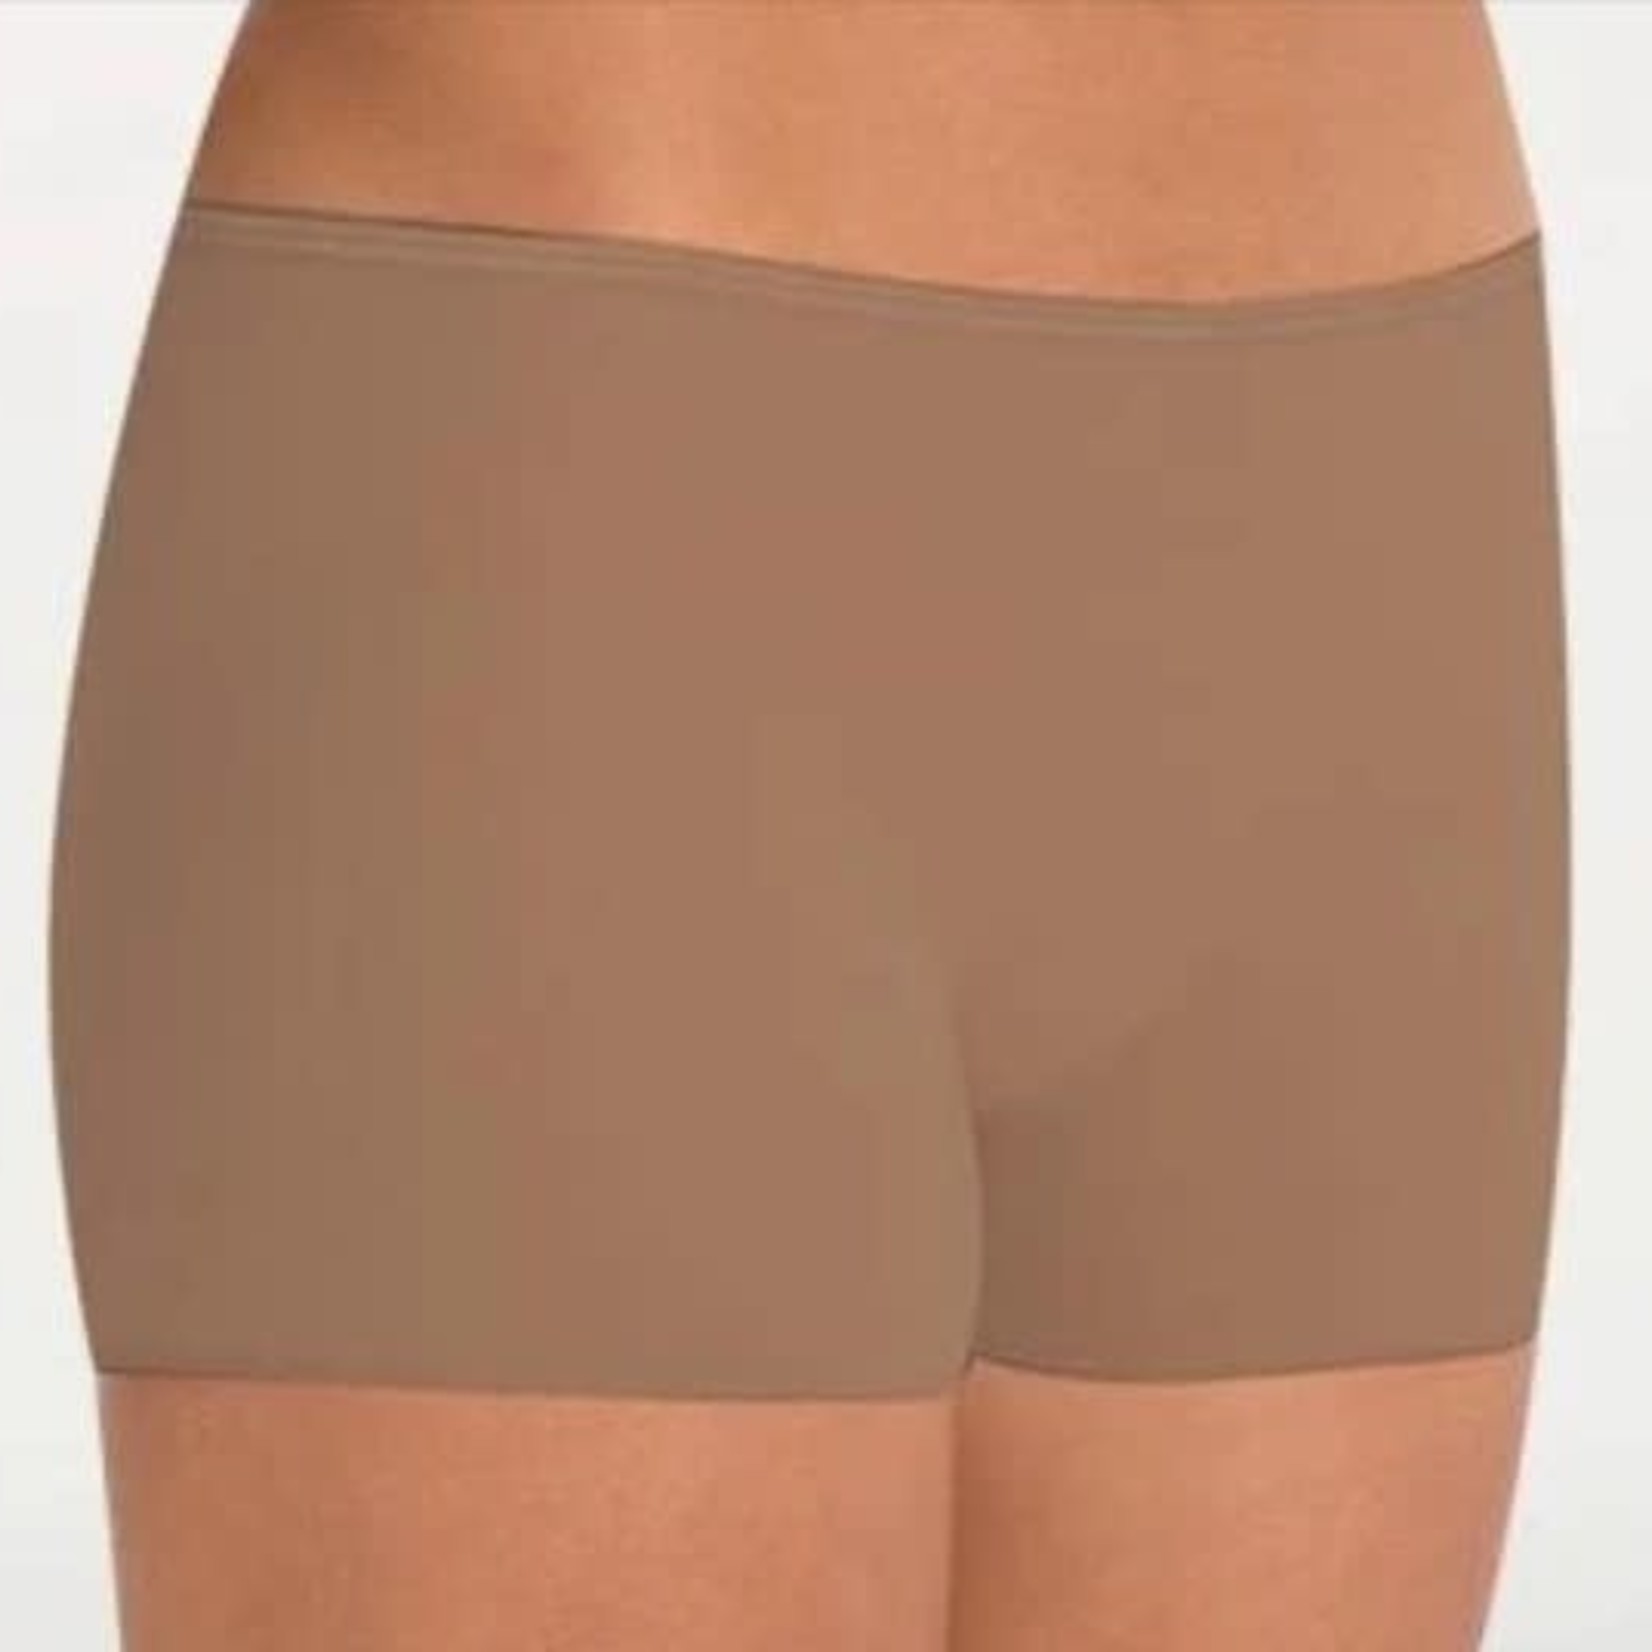 Body Wrappers Body Wrappers 289 Seamless Undergarment Shorts